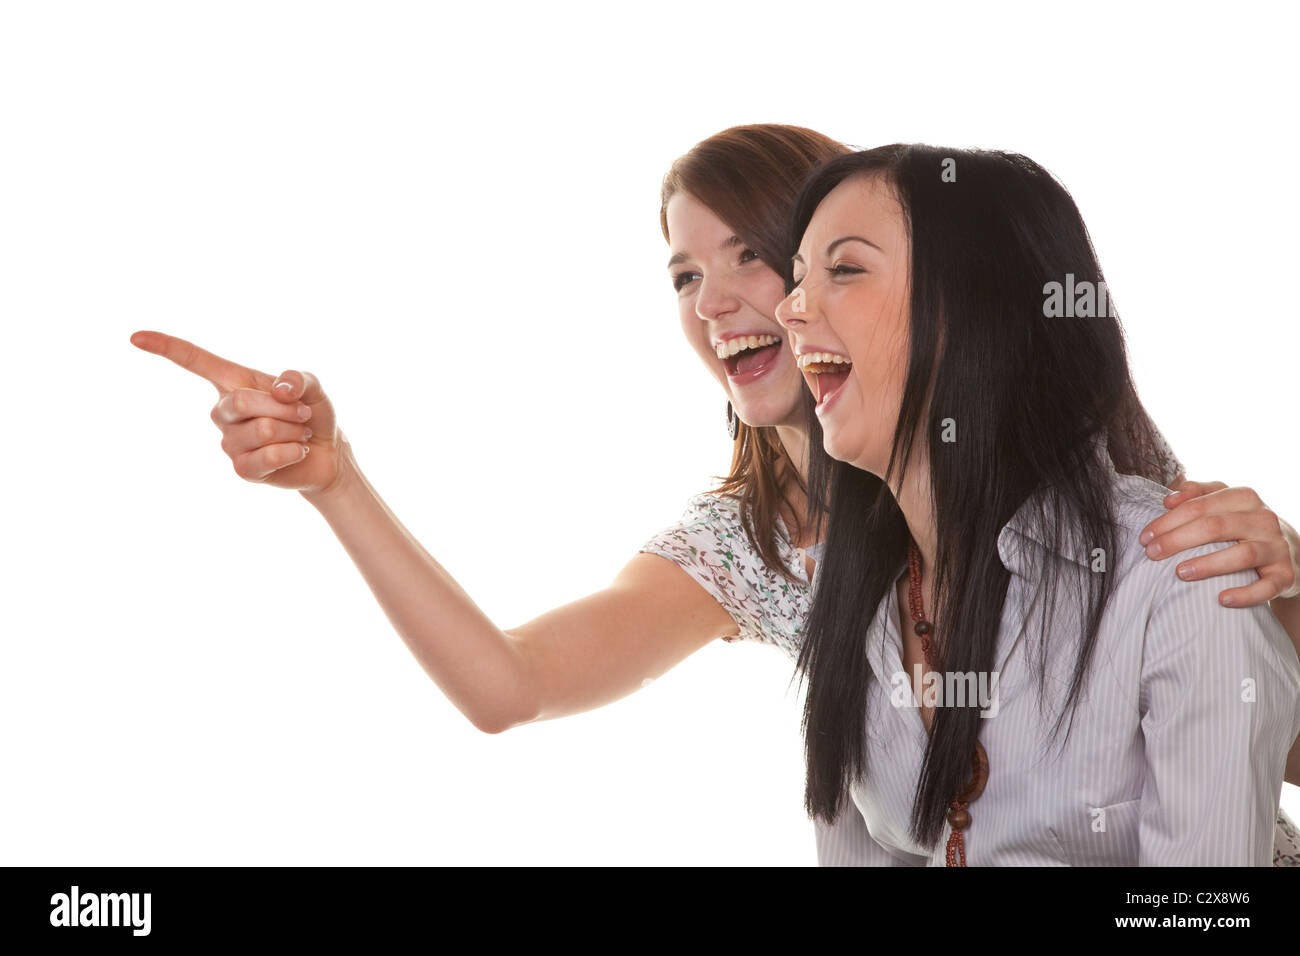 Two girls laughing about something rediculous Stock Photo